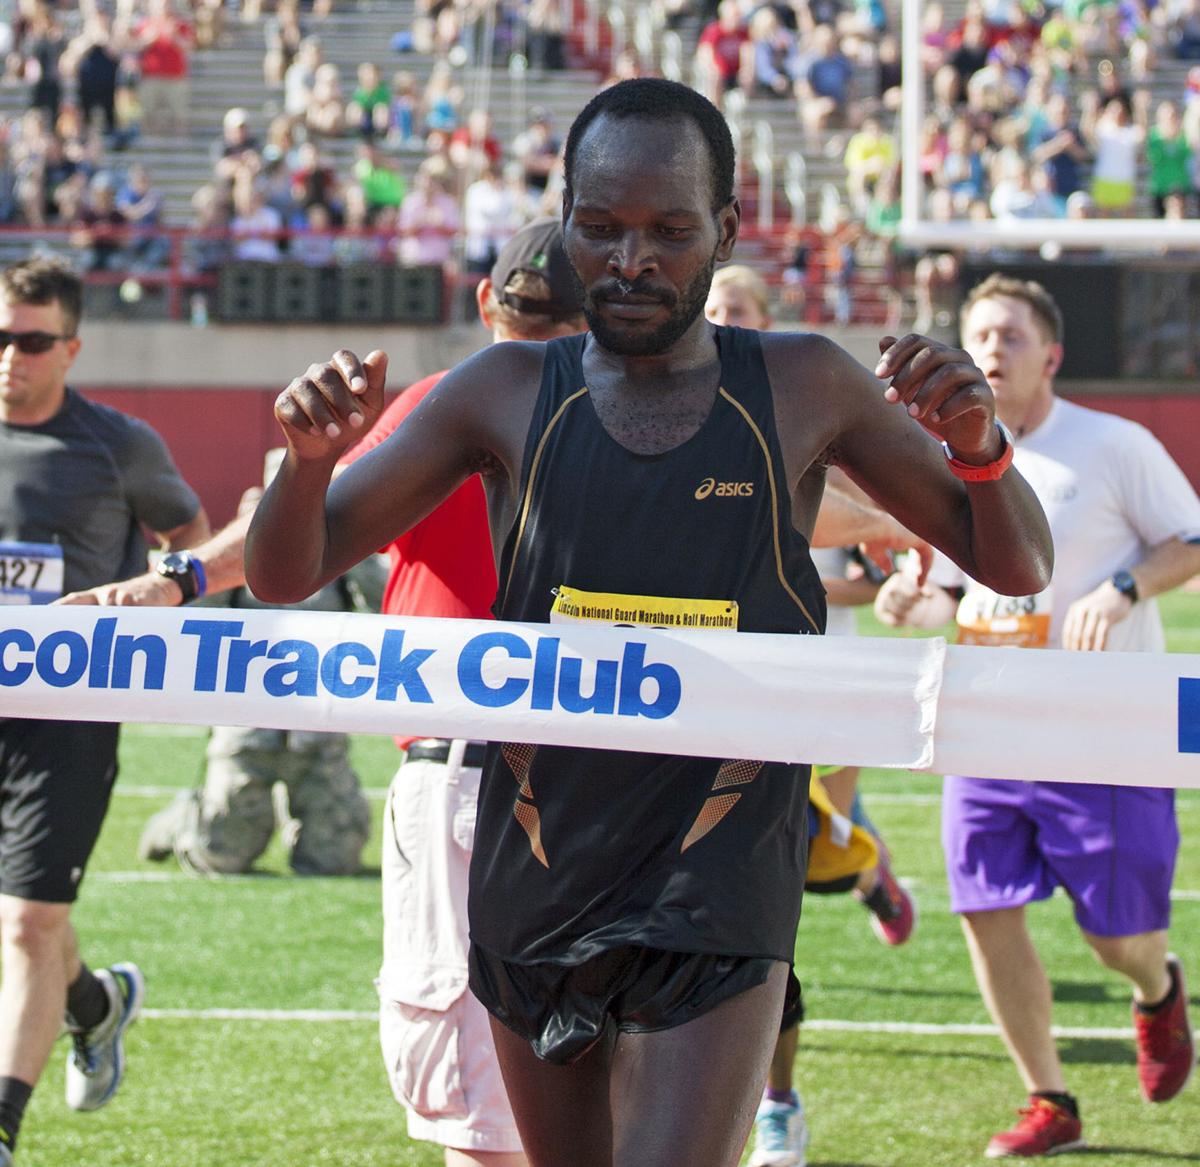 Photos: Highlights from the Lincoln Marathon | Photo galleries ...